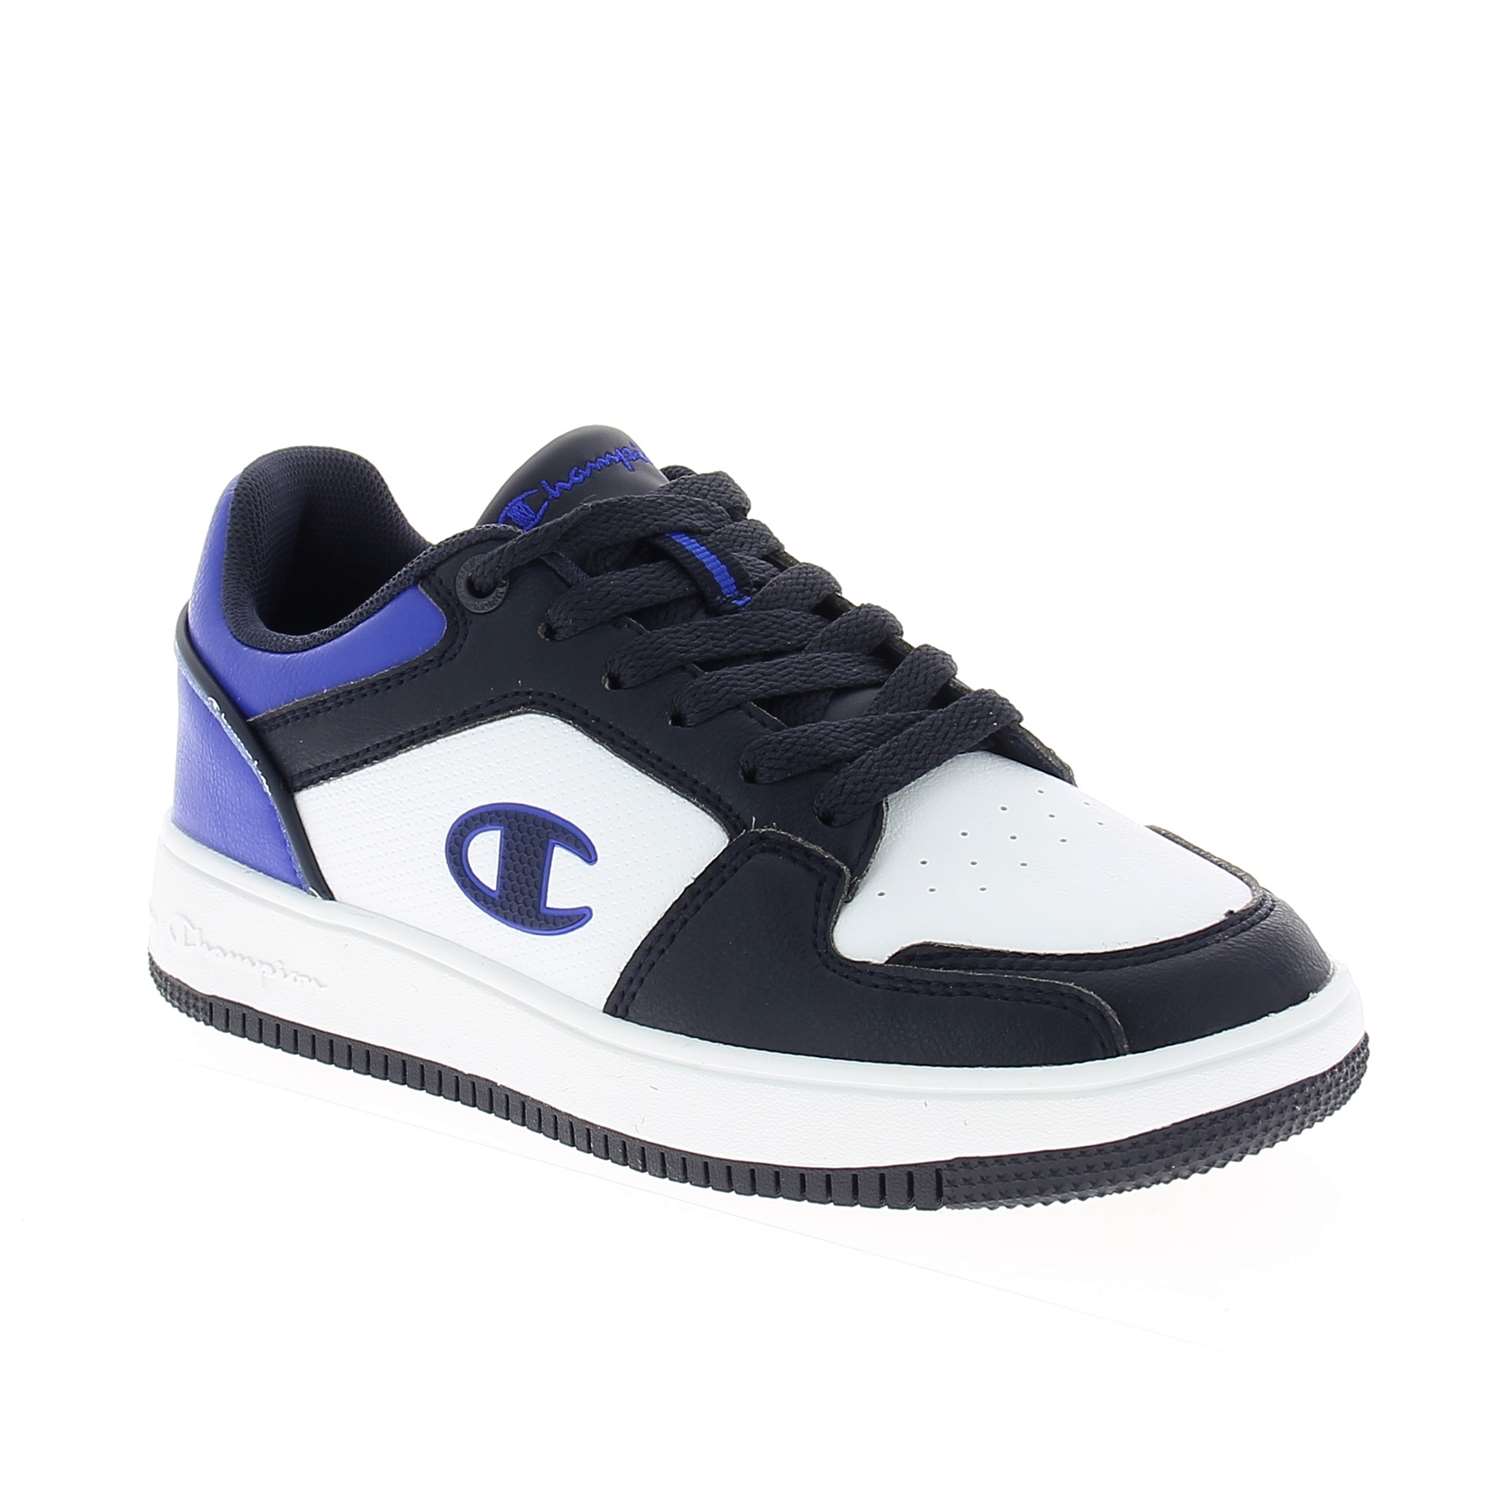 01 - REBOUND 2.0 LOW GS - CHAMPION - Baskets - Synthétique